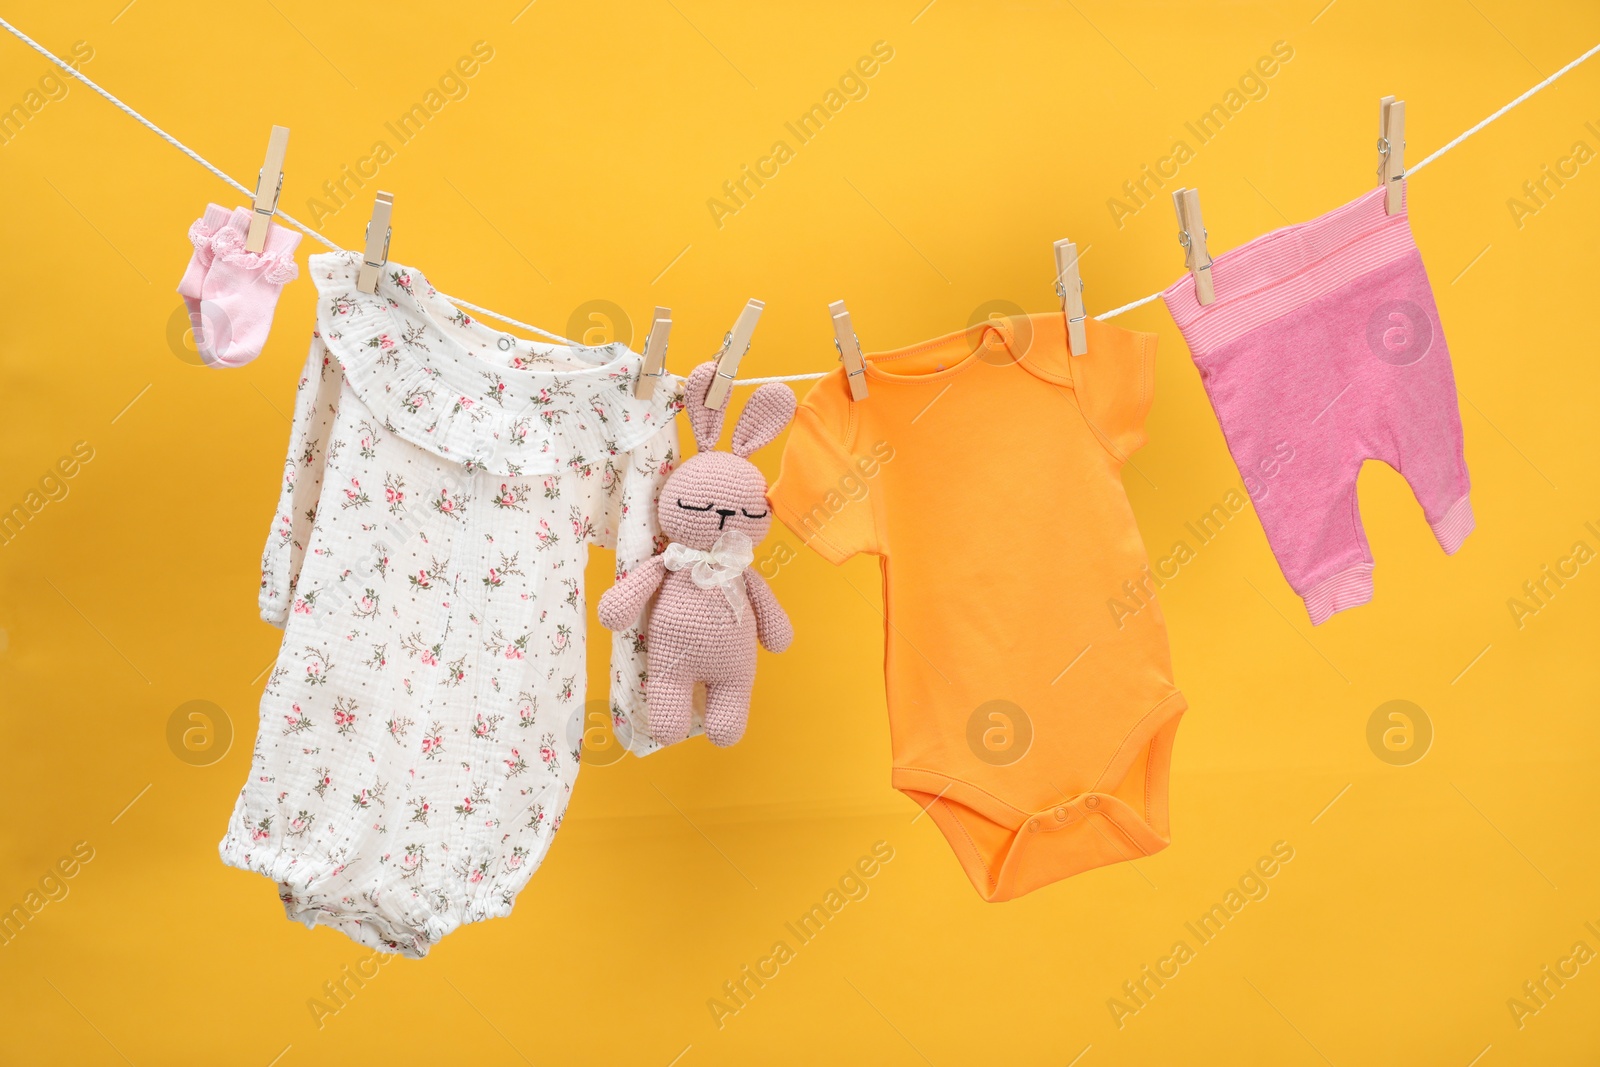 Photo of Different baby clothes and bunny toy drying on laundry line against orange background